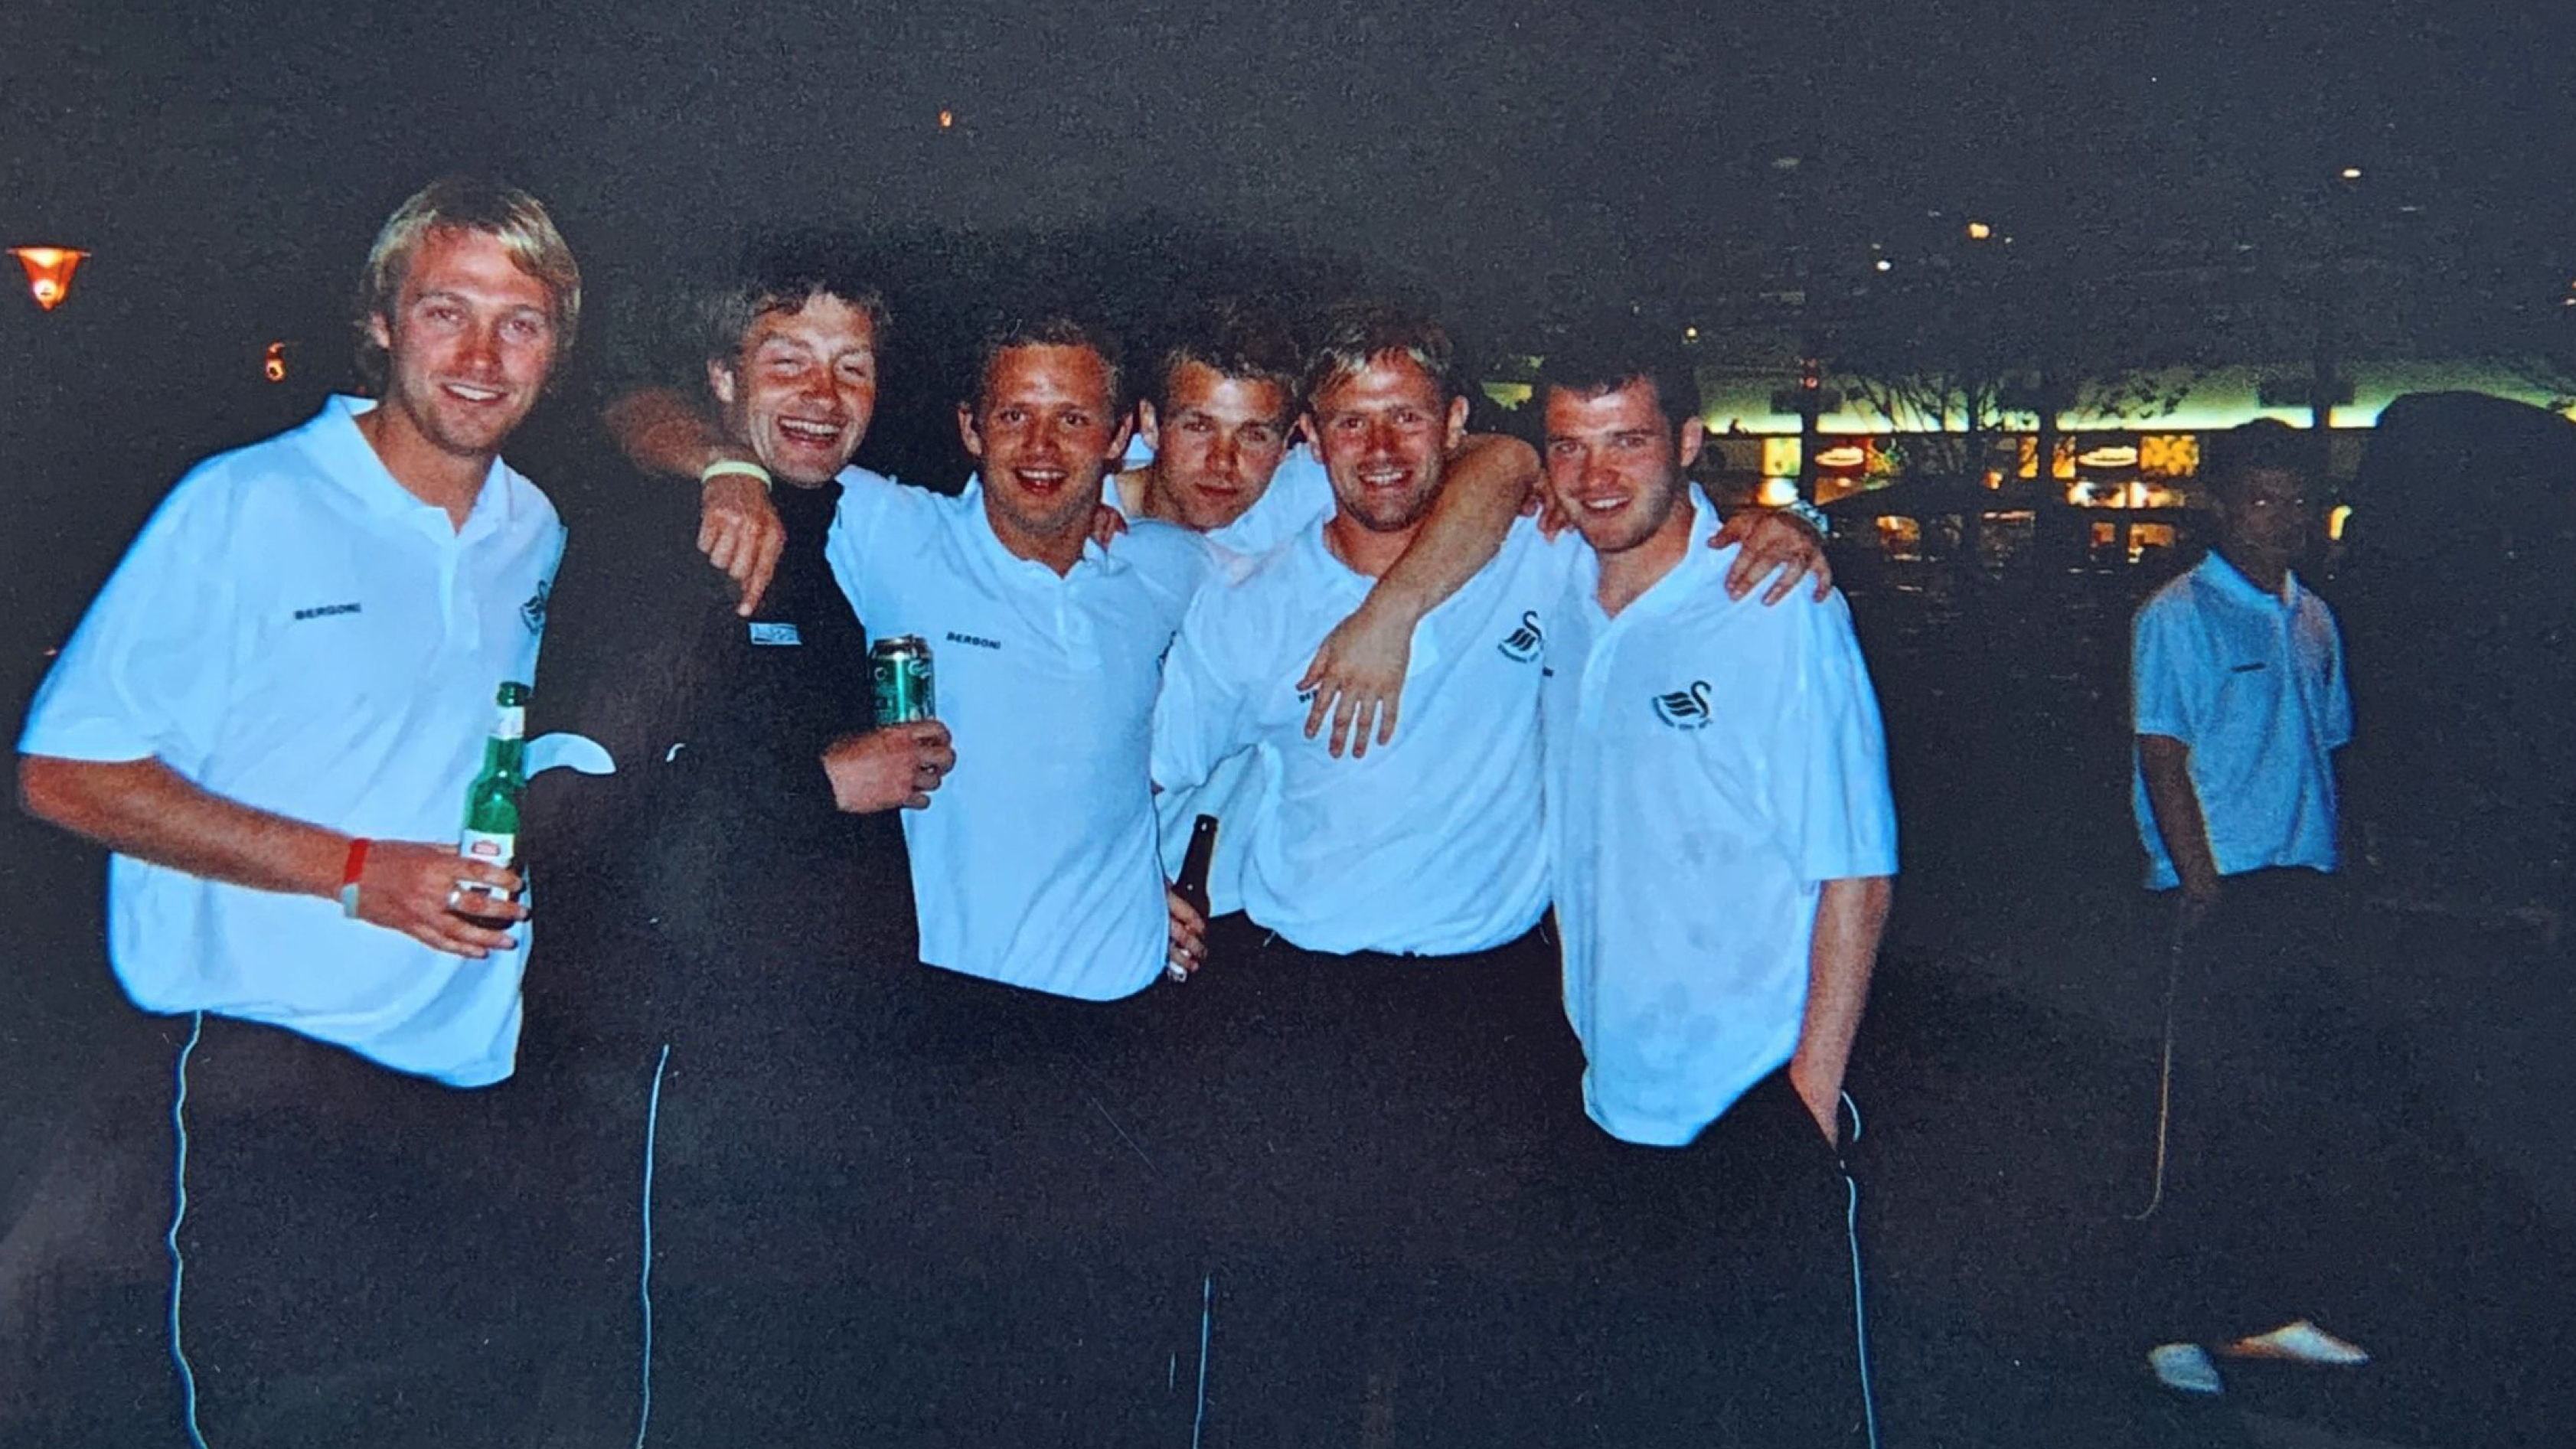 Paul Connor, Kevin Nugent, Lee Trundle, Brian Murphy, Kristian O'Leary and Kevin McLeod. Photo courtesy of Kristian O'Leary